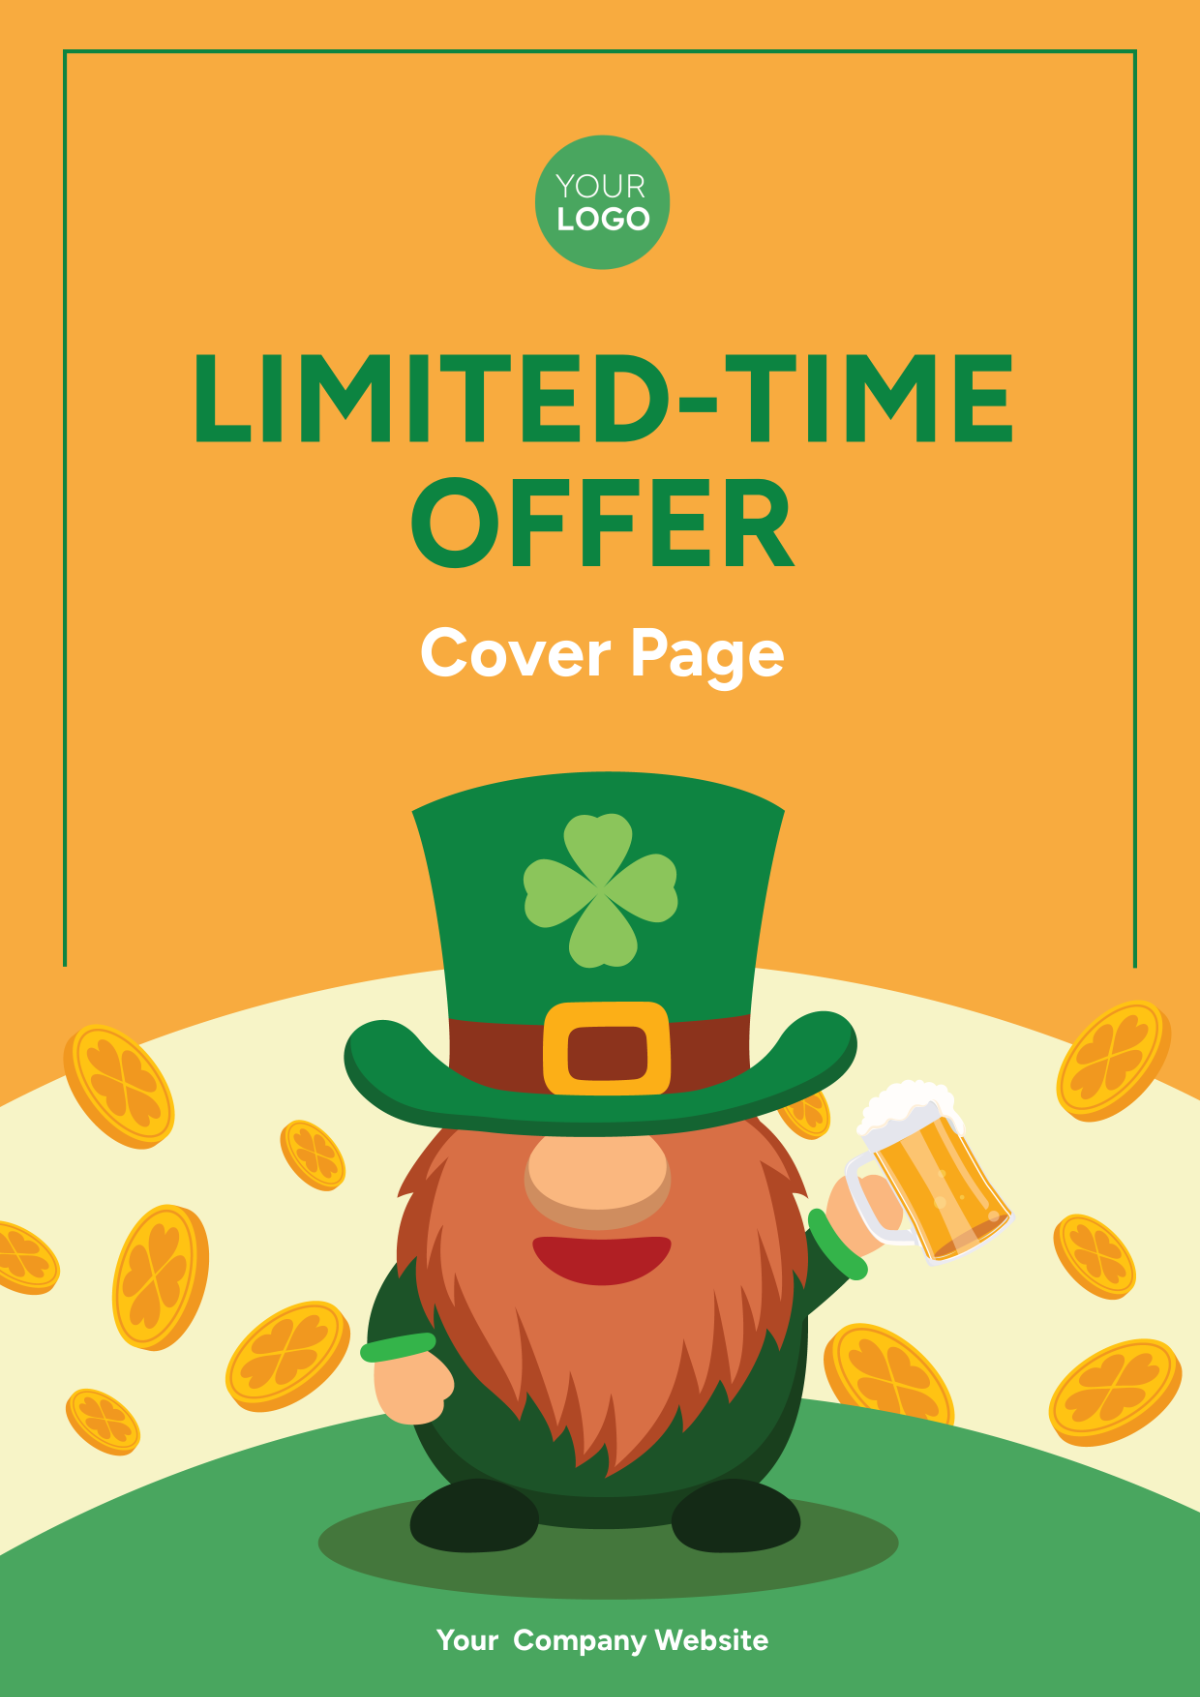 Limited-Time Offer Cover Page Template